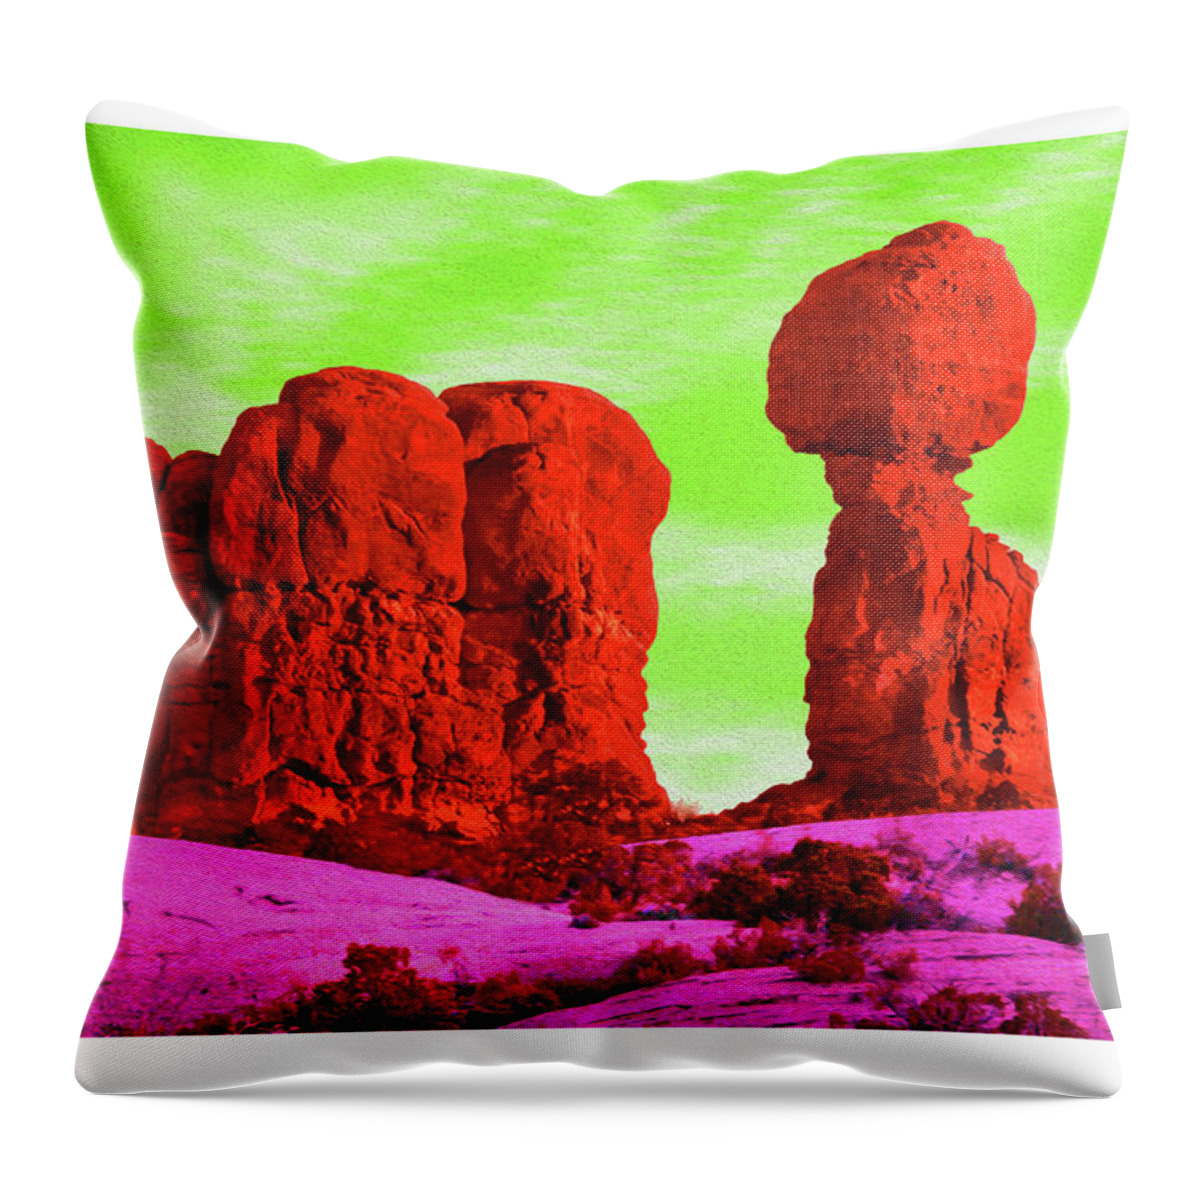 Pop Art Throw Pillow featuring the photograph Electric Southwest 3 by Mike McGlothlen